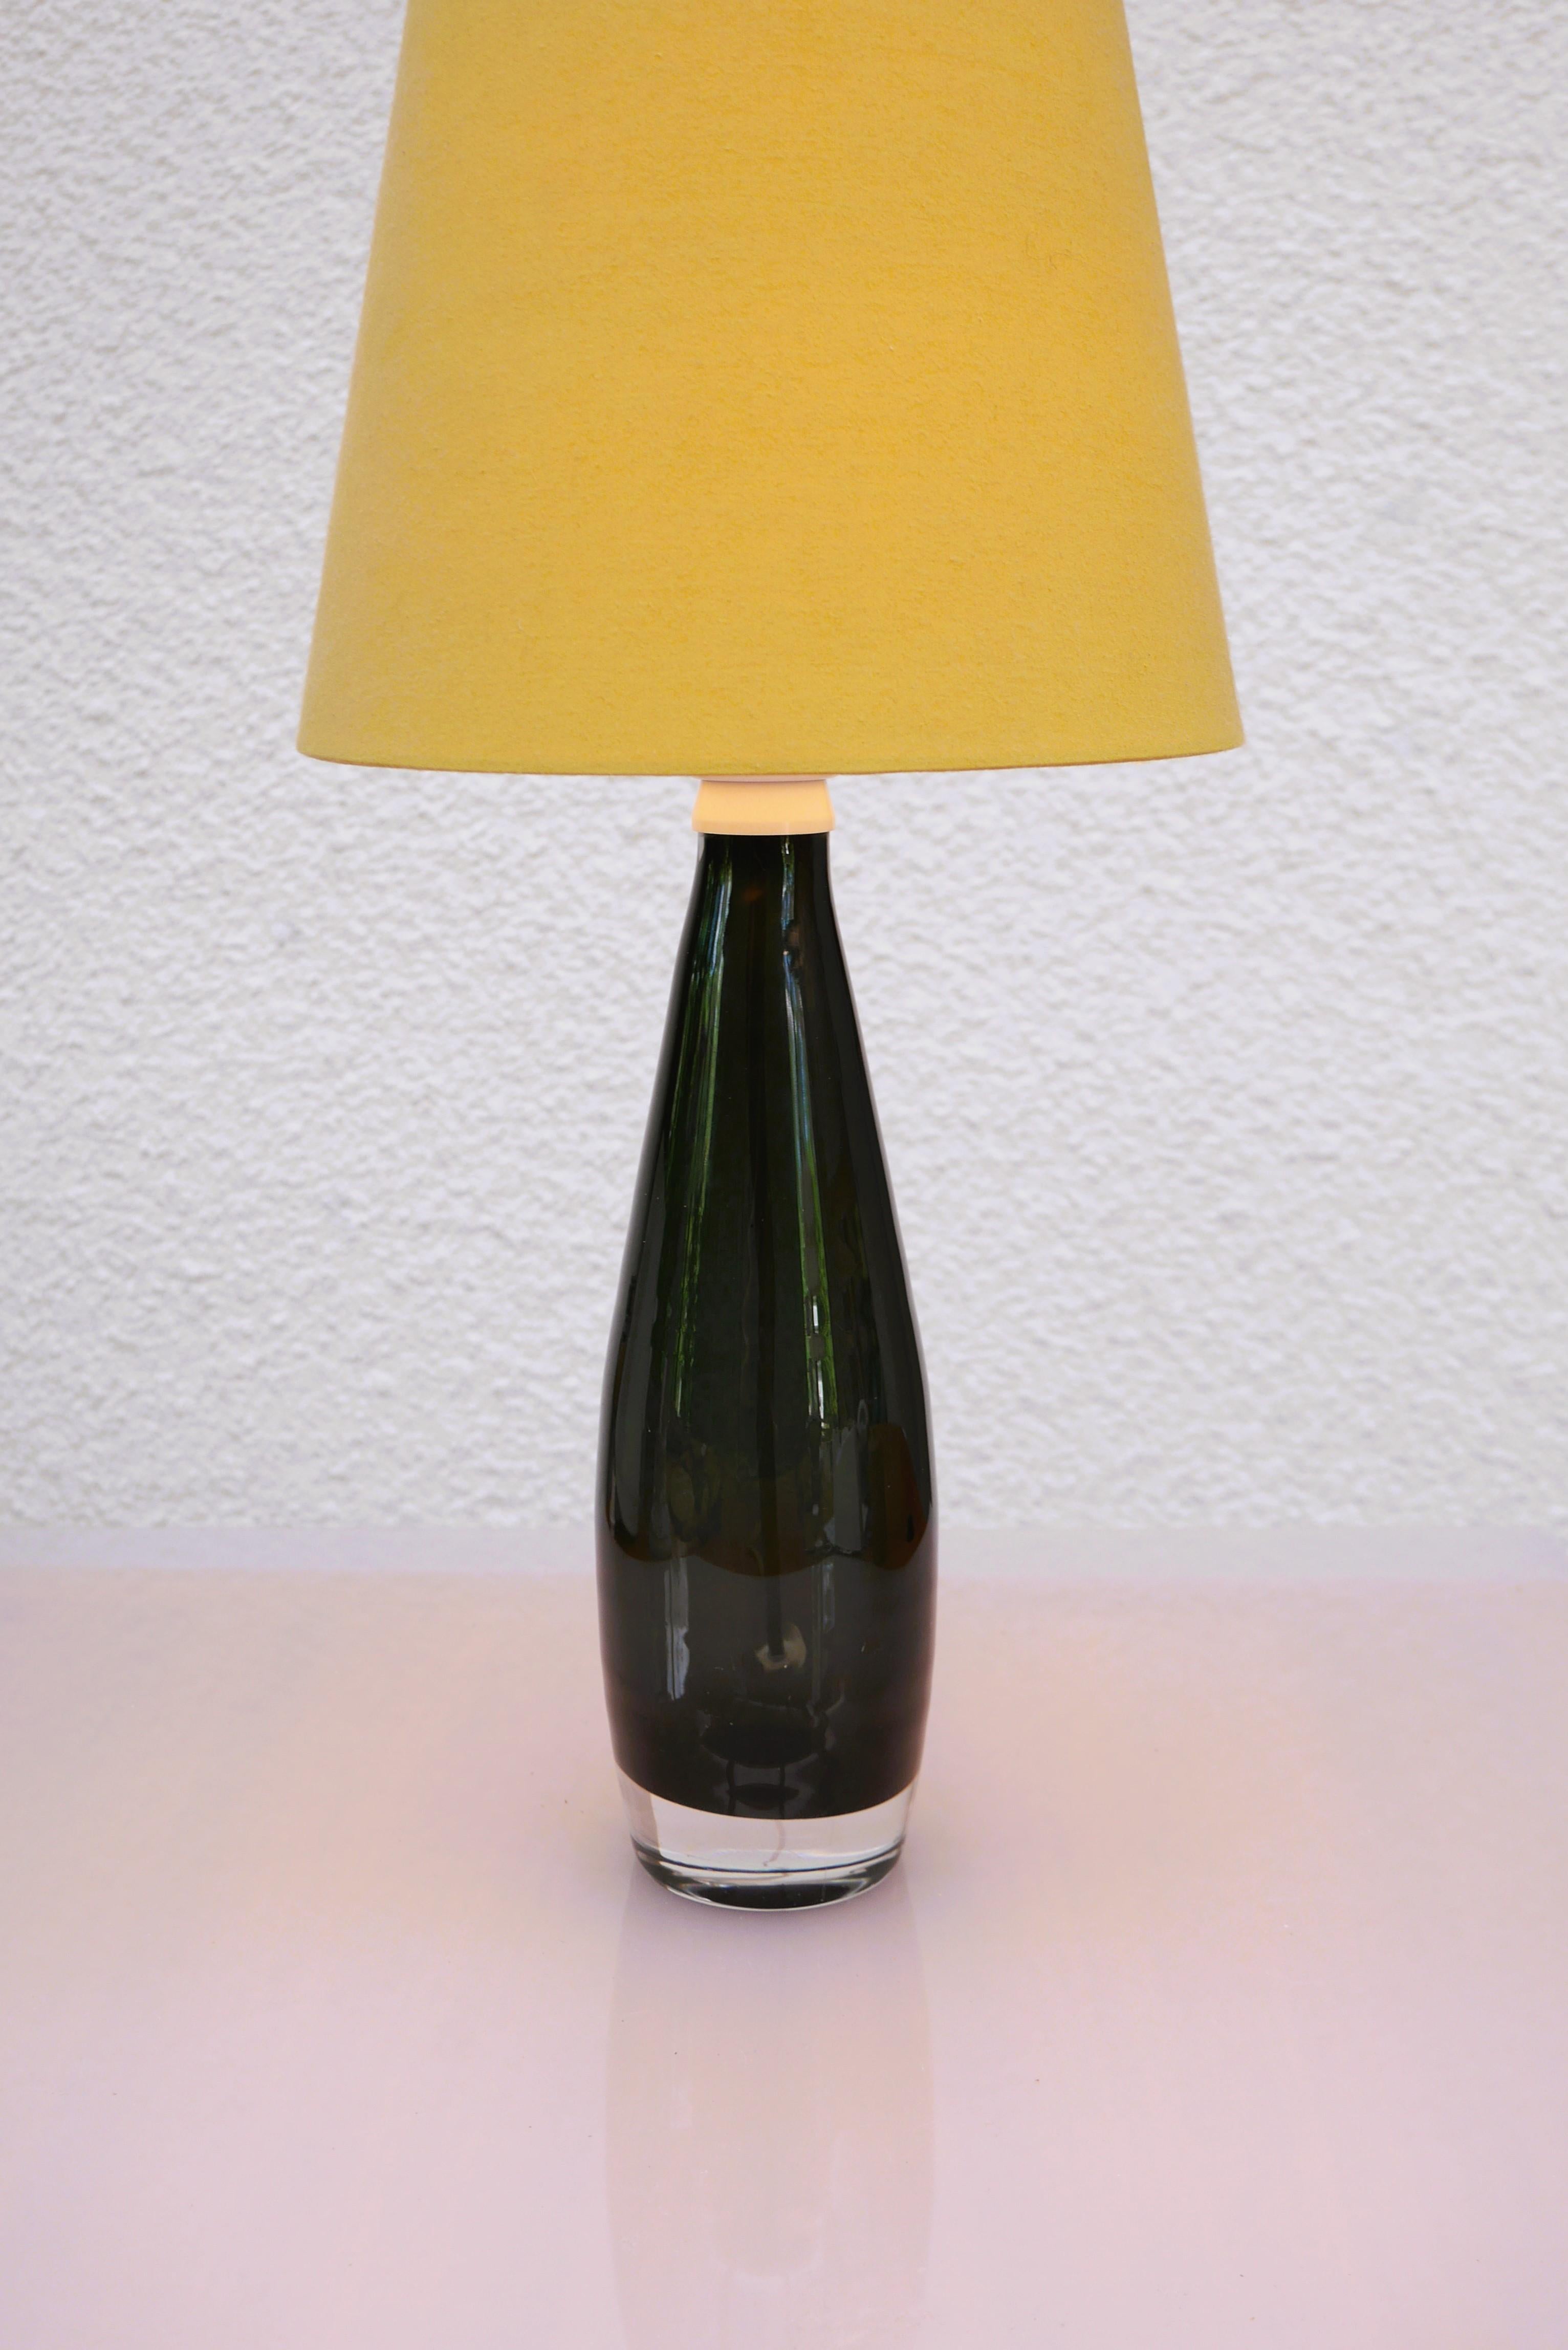 Hand-Crafted Mid-century Modern sommerso lamp base made and signed by Ove Sandberg Kosta For Sale